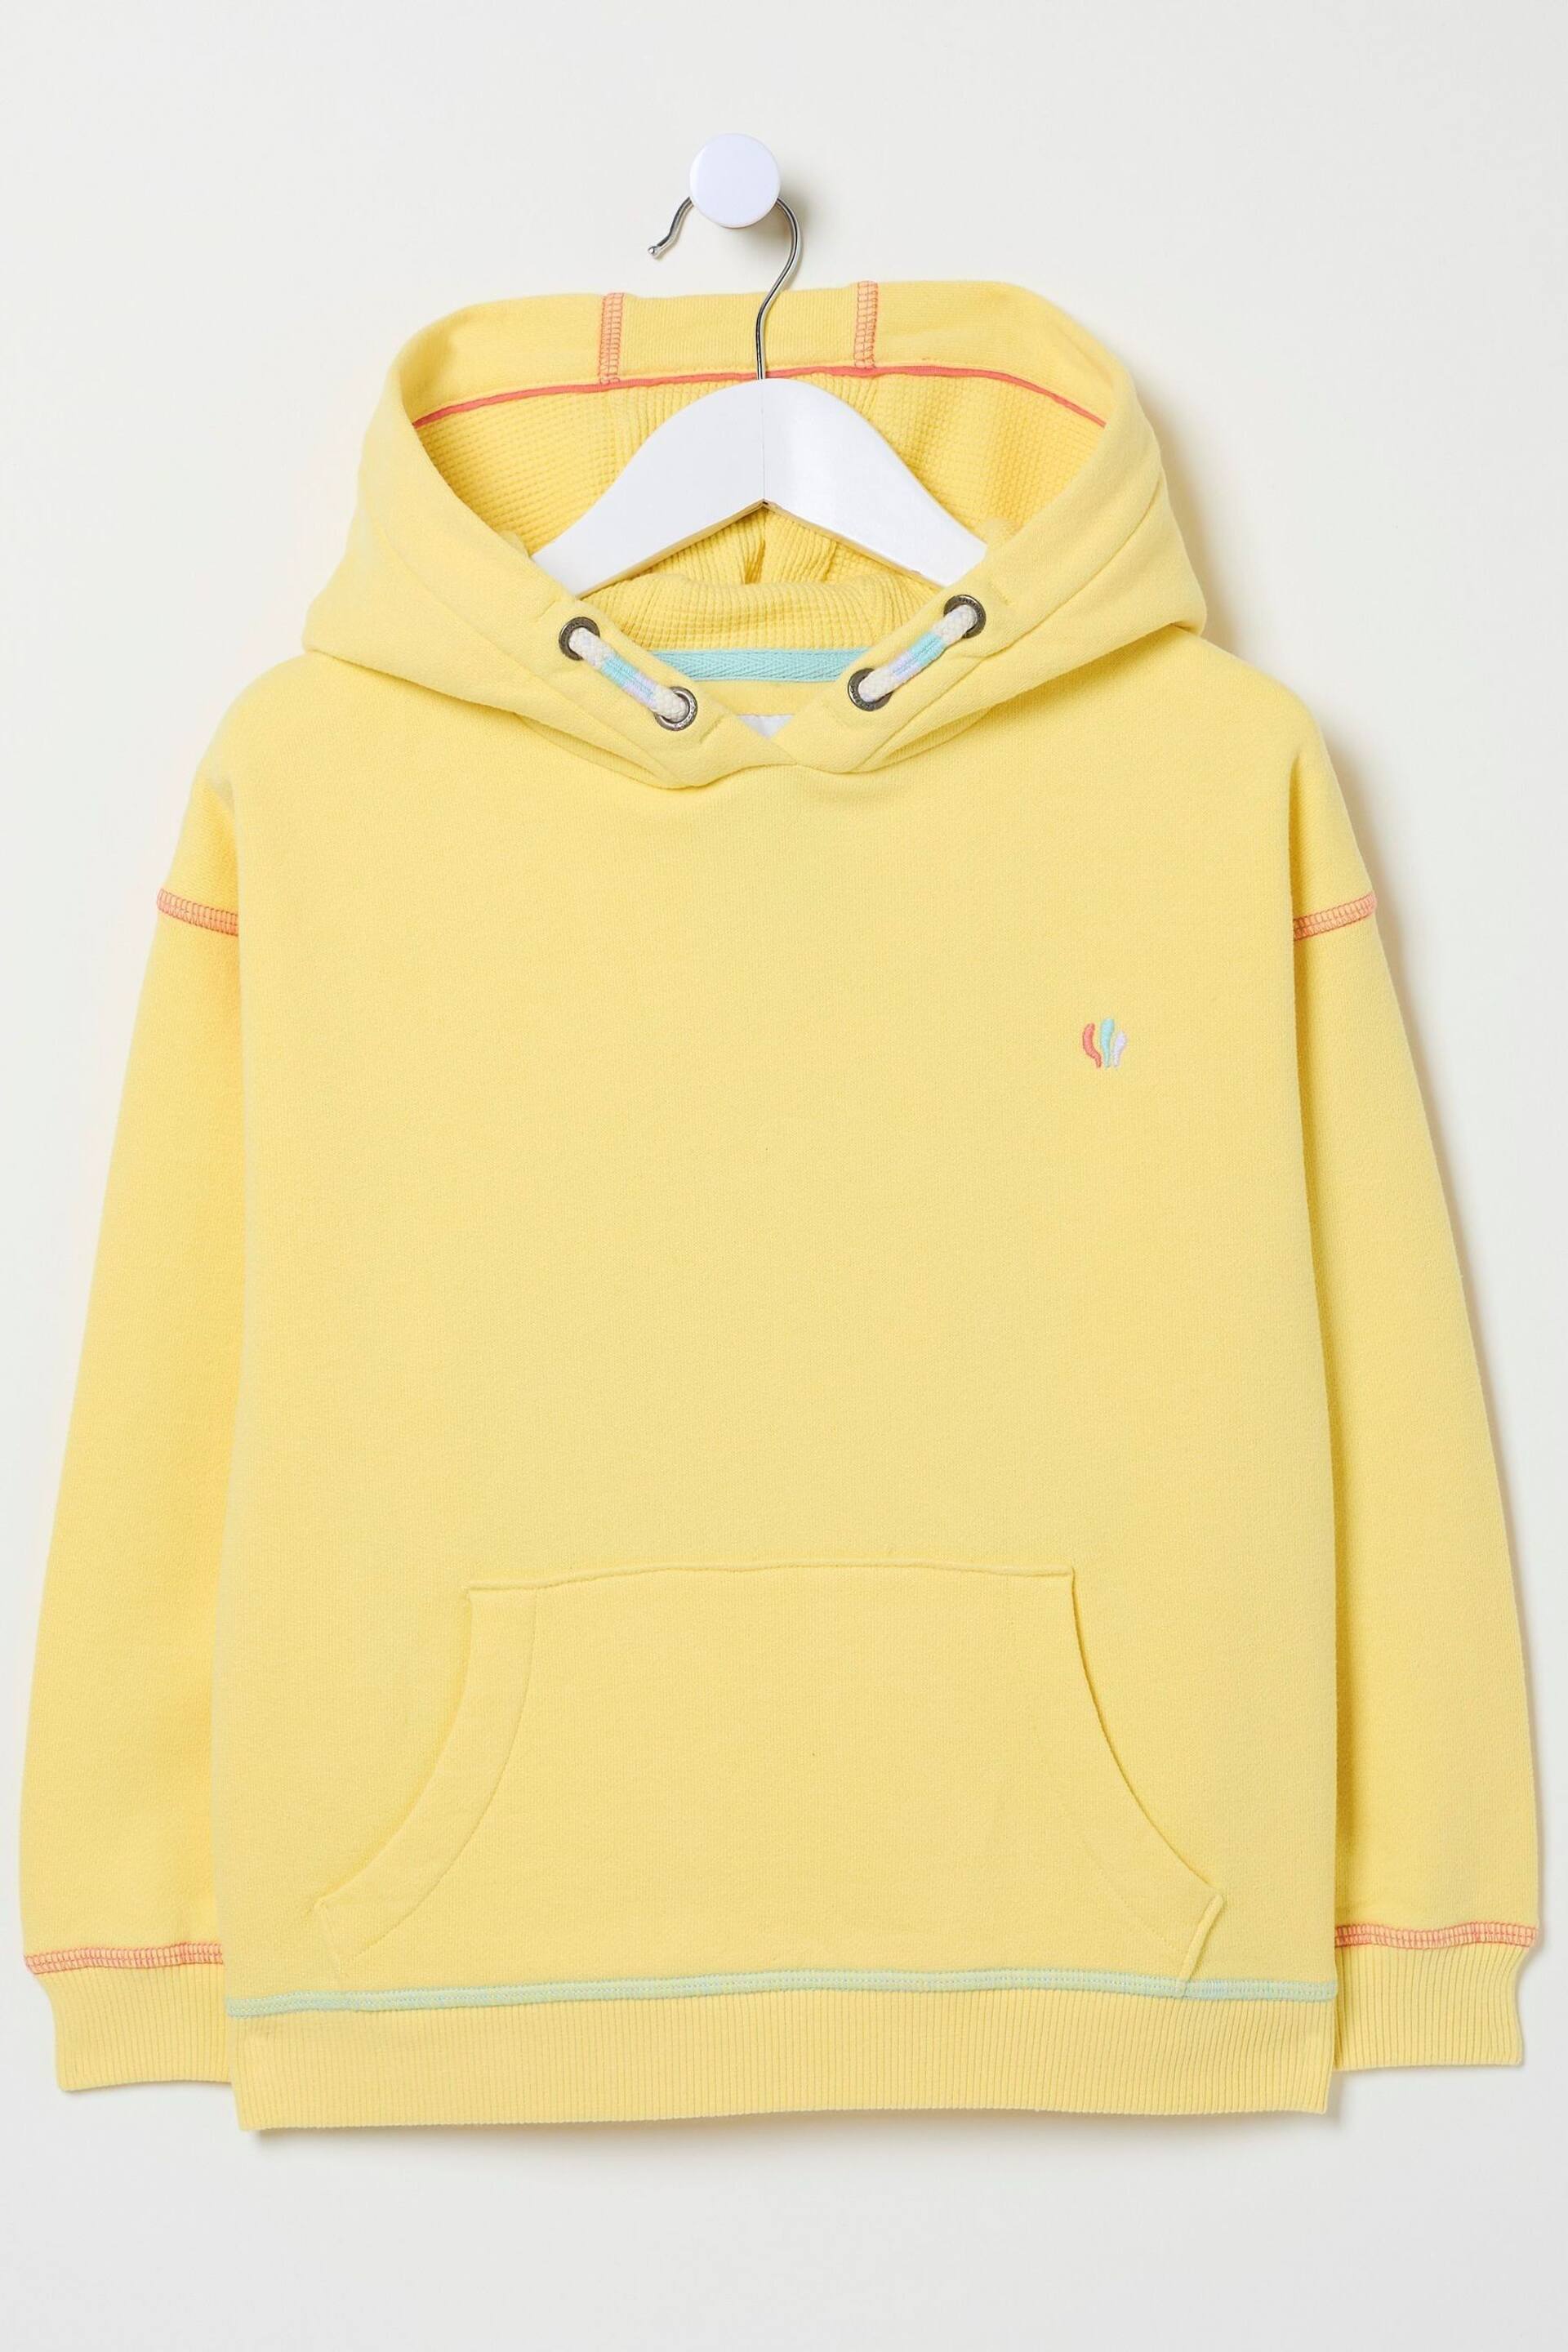 FatFace Yellow Creature Graphic Popover Hoodie - Image 4 of 5